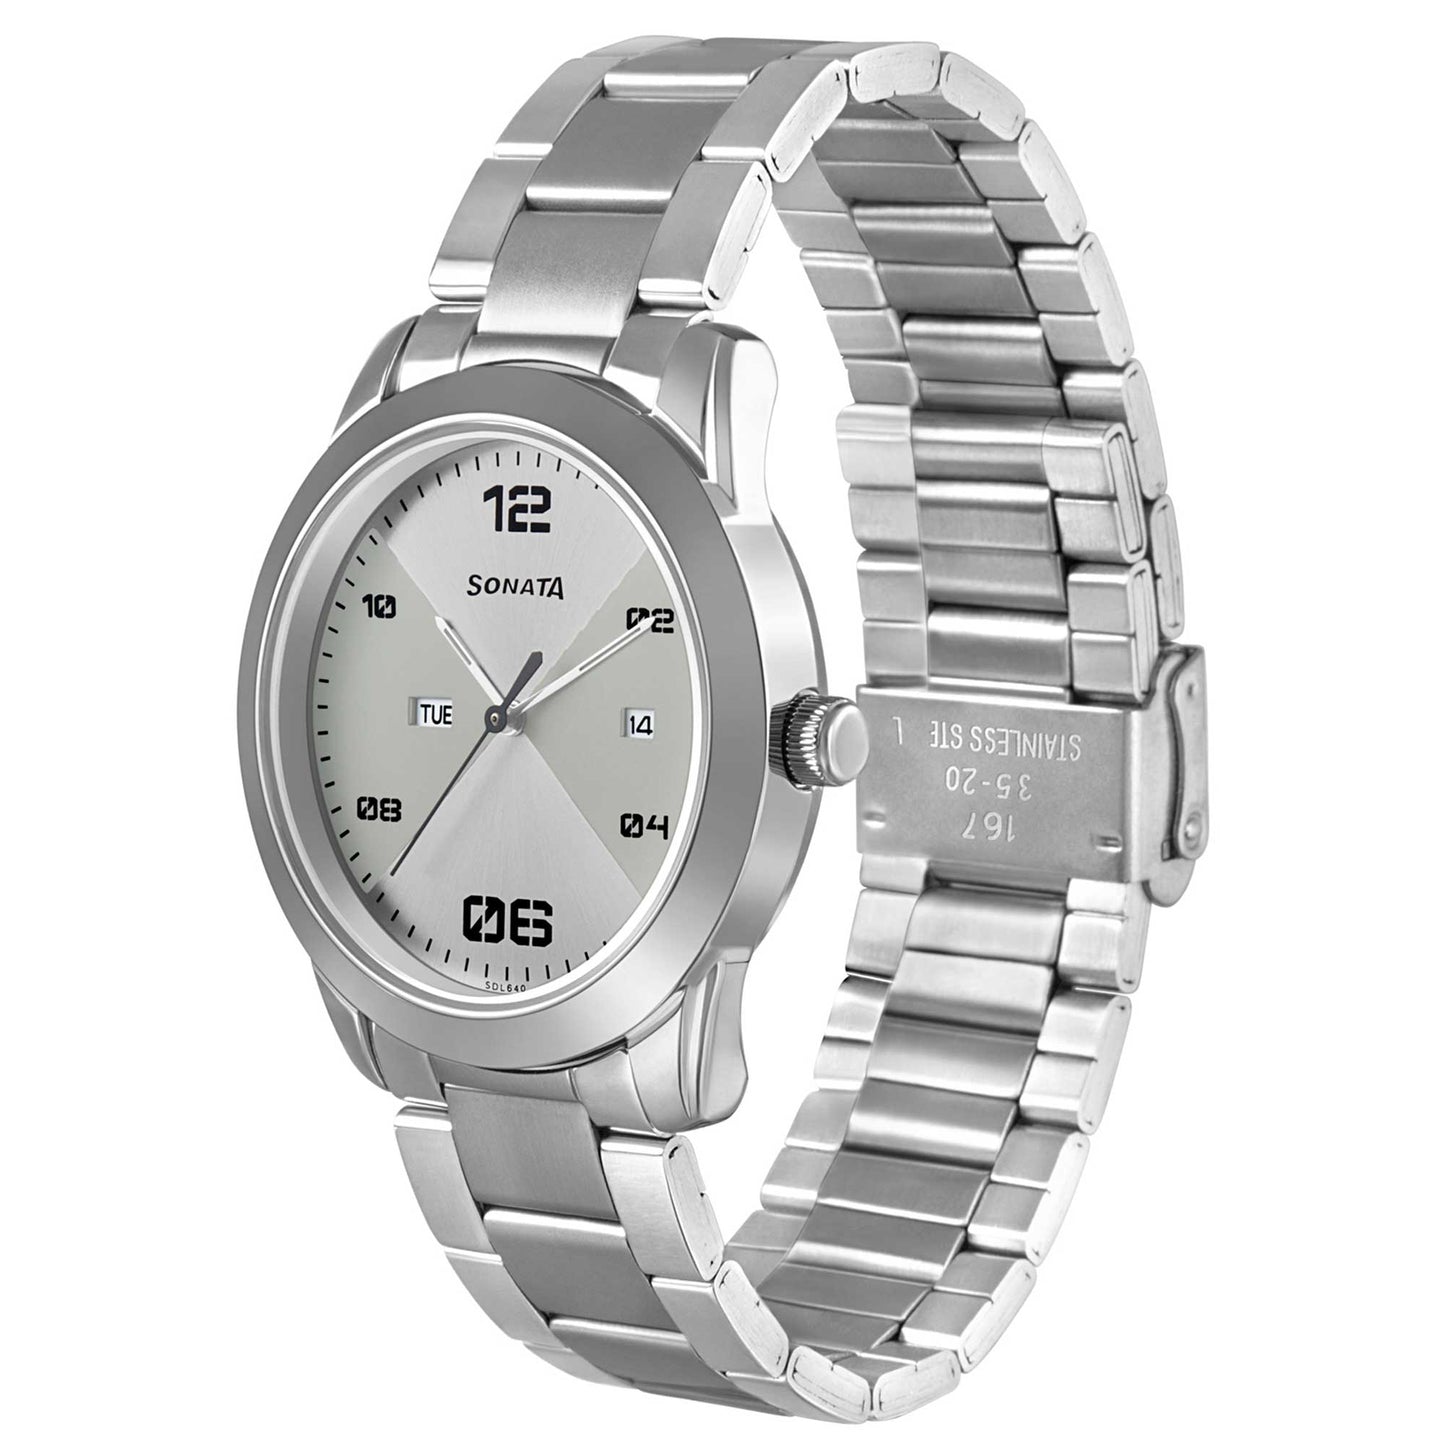 Sonata Quartz Analog with Day and Date Silver Dial Stainless Steel Strap Watch for Men